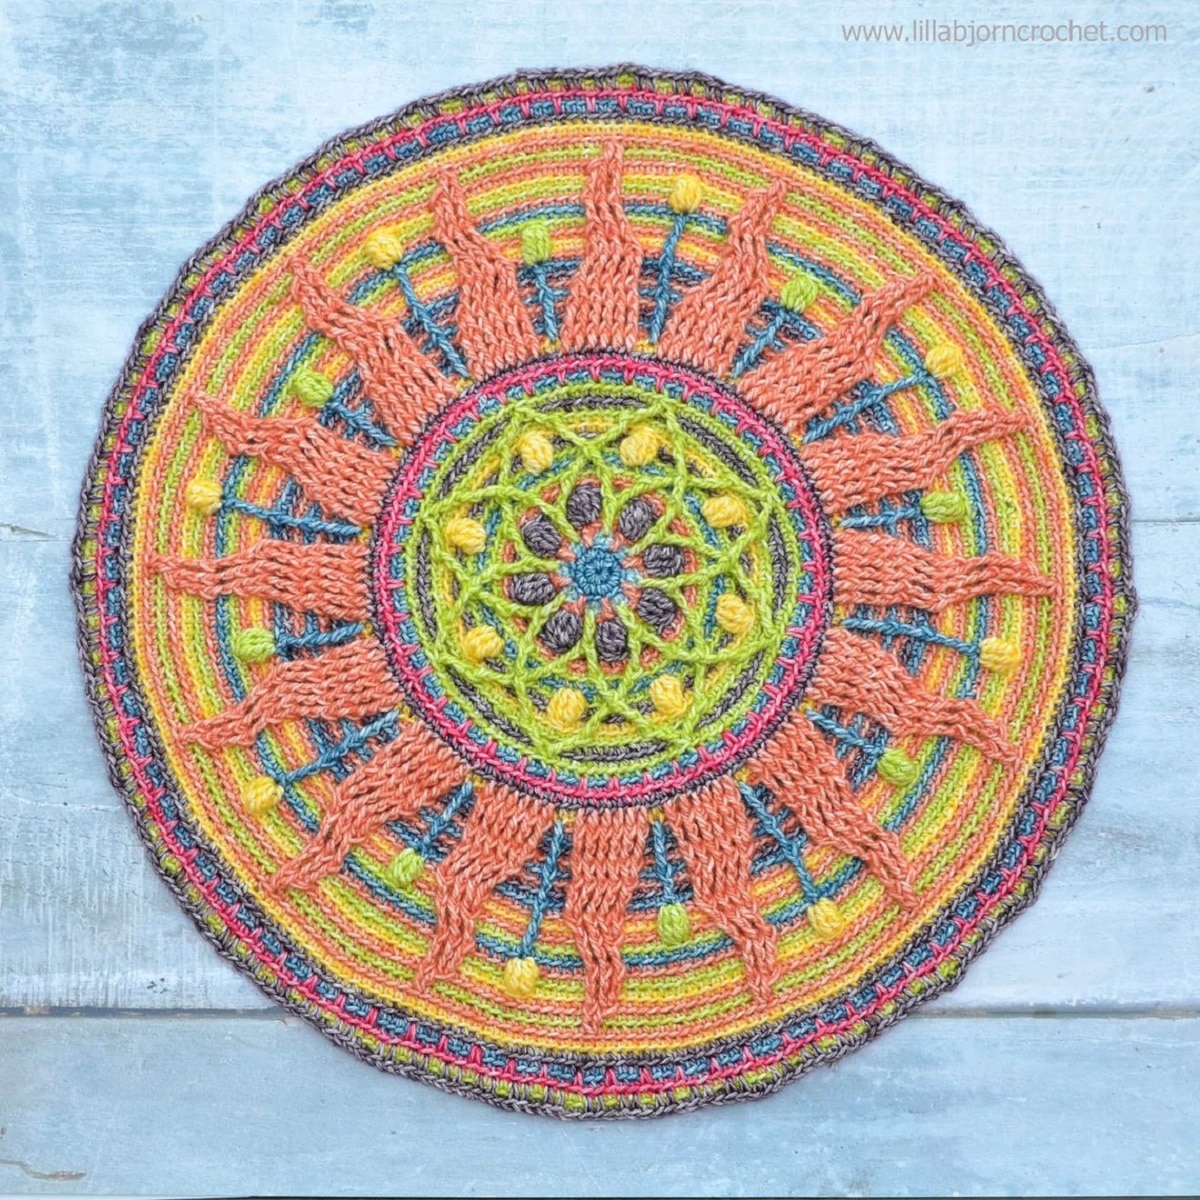 A round crochet mandala with a large yellow flower in the center and light orange petals spreading out to the edges of the circle.